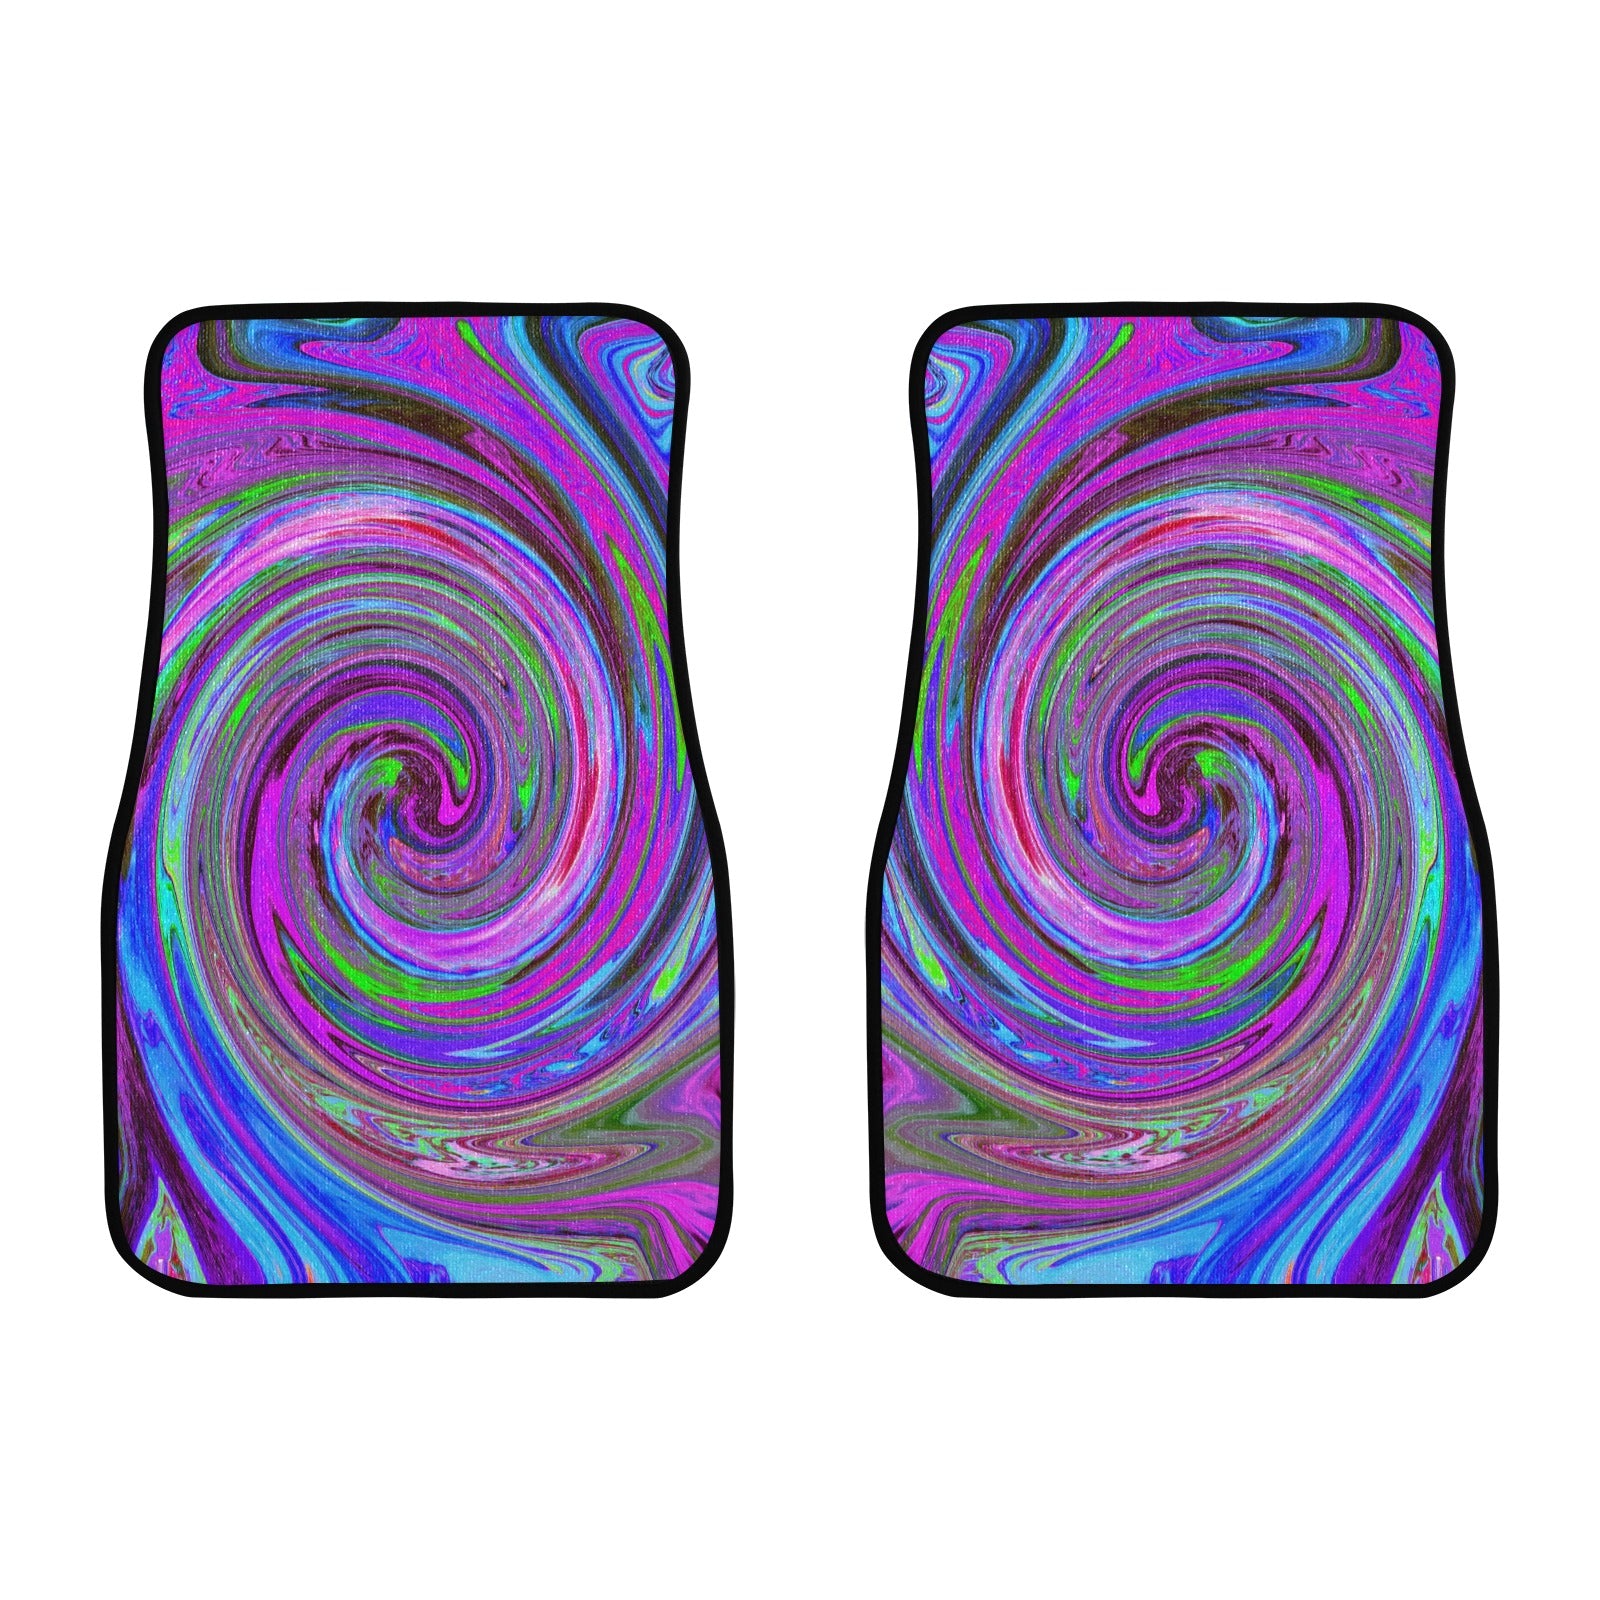 Car Floor Mats, Colorful Magenta Swirl Retro Abstract Design - Front Set of 2